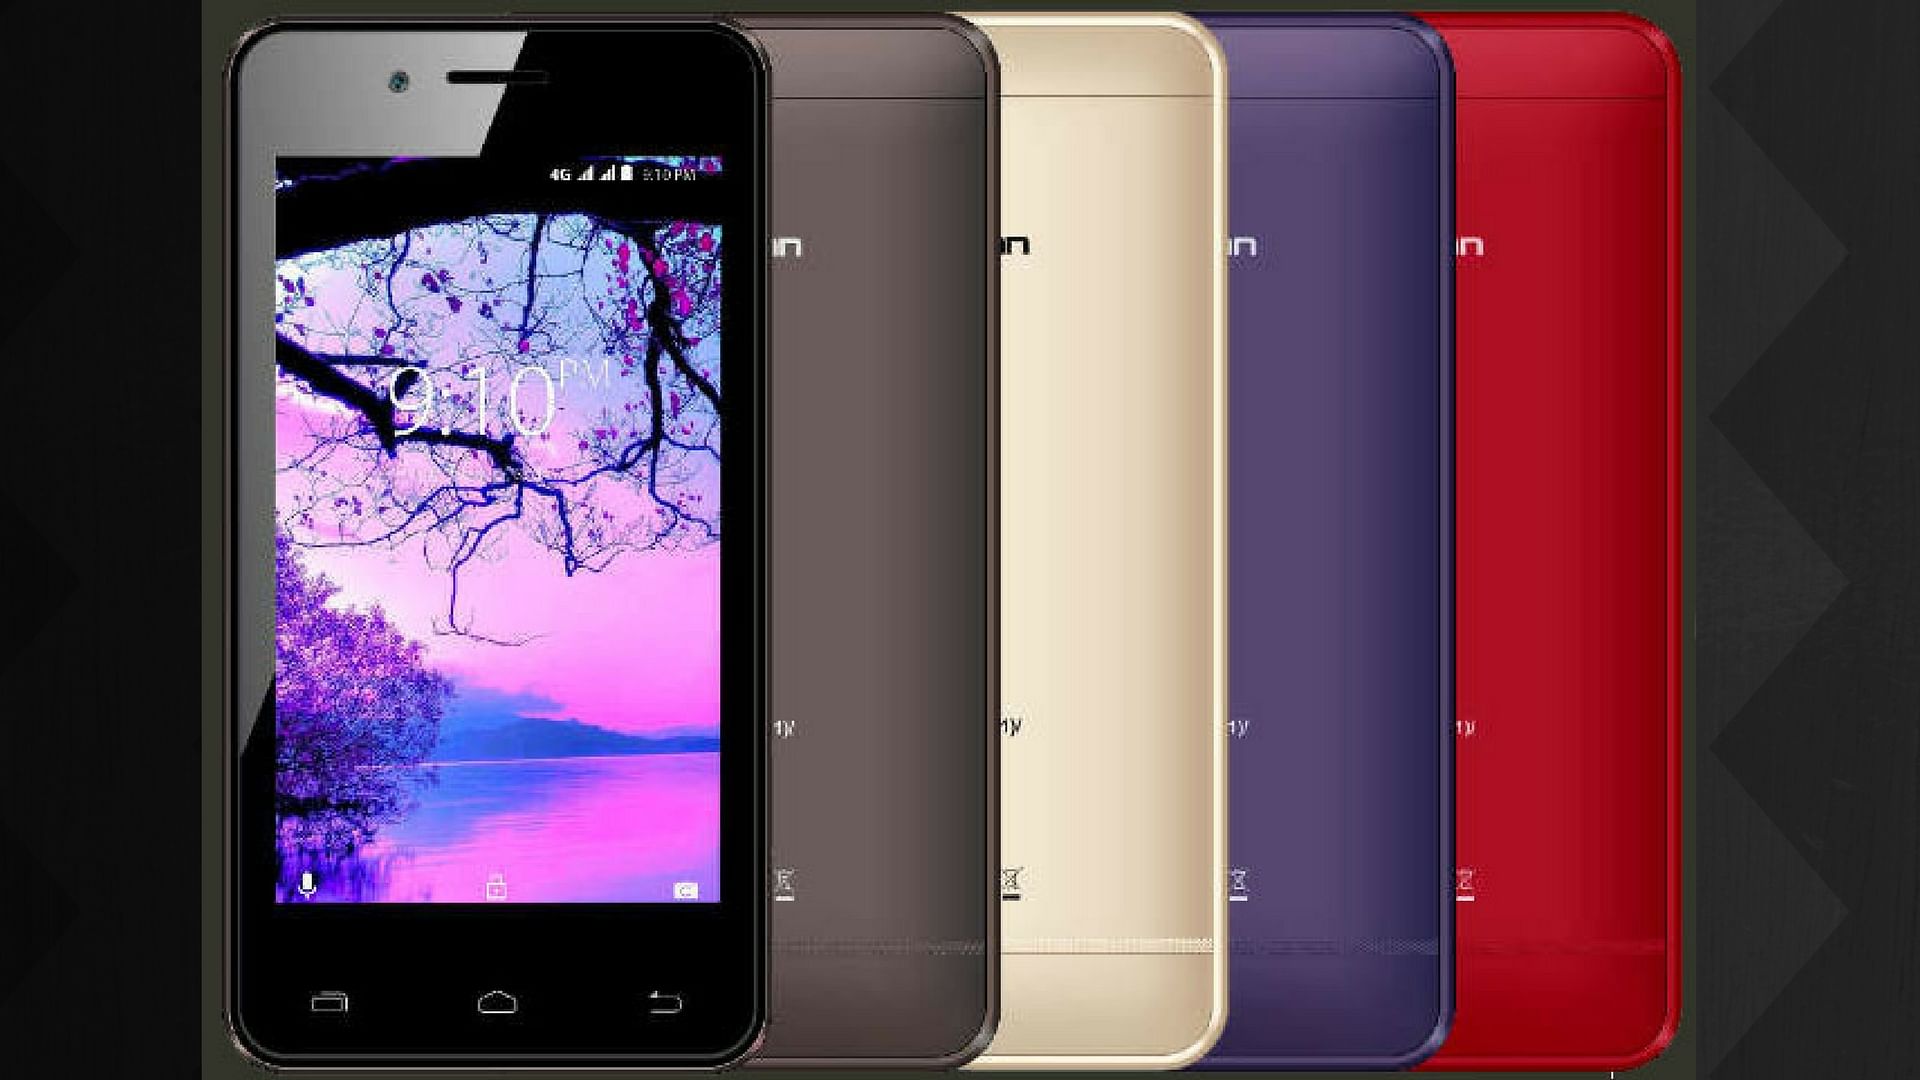 The new Karbonn A40 Indian launched in India